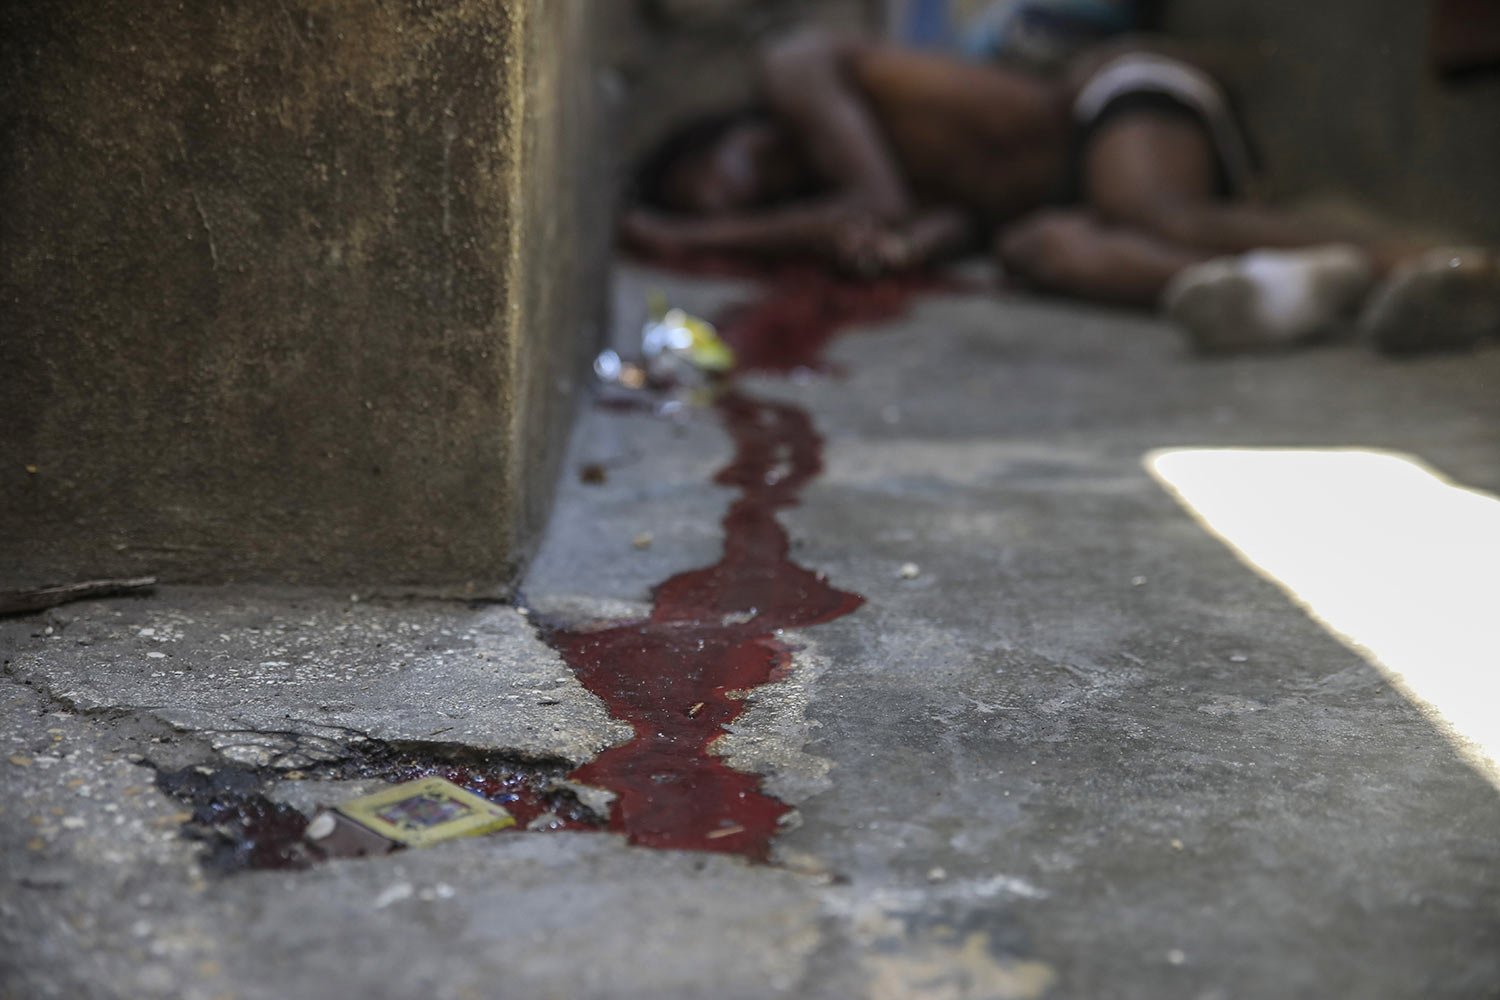  The body of Haitian comedian Sexy lies on the ground after he was shot dead in Port-au-Prince, Haiti, March 3, 2023, amid a sharp rise in gang violence that has left dozens dead in recent weeks. (AP Photo/Odelyn Joseph) 